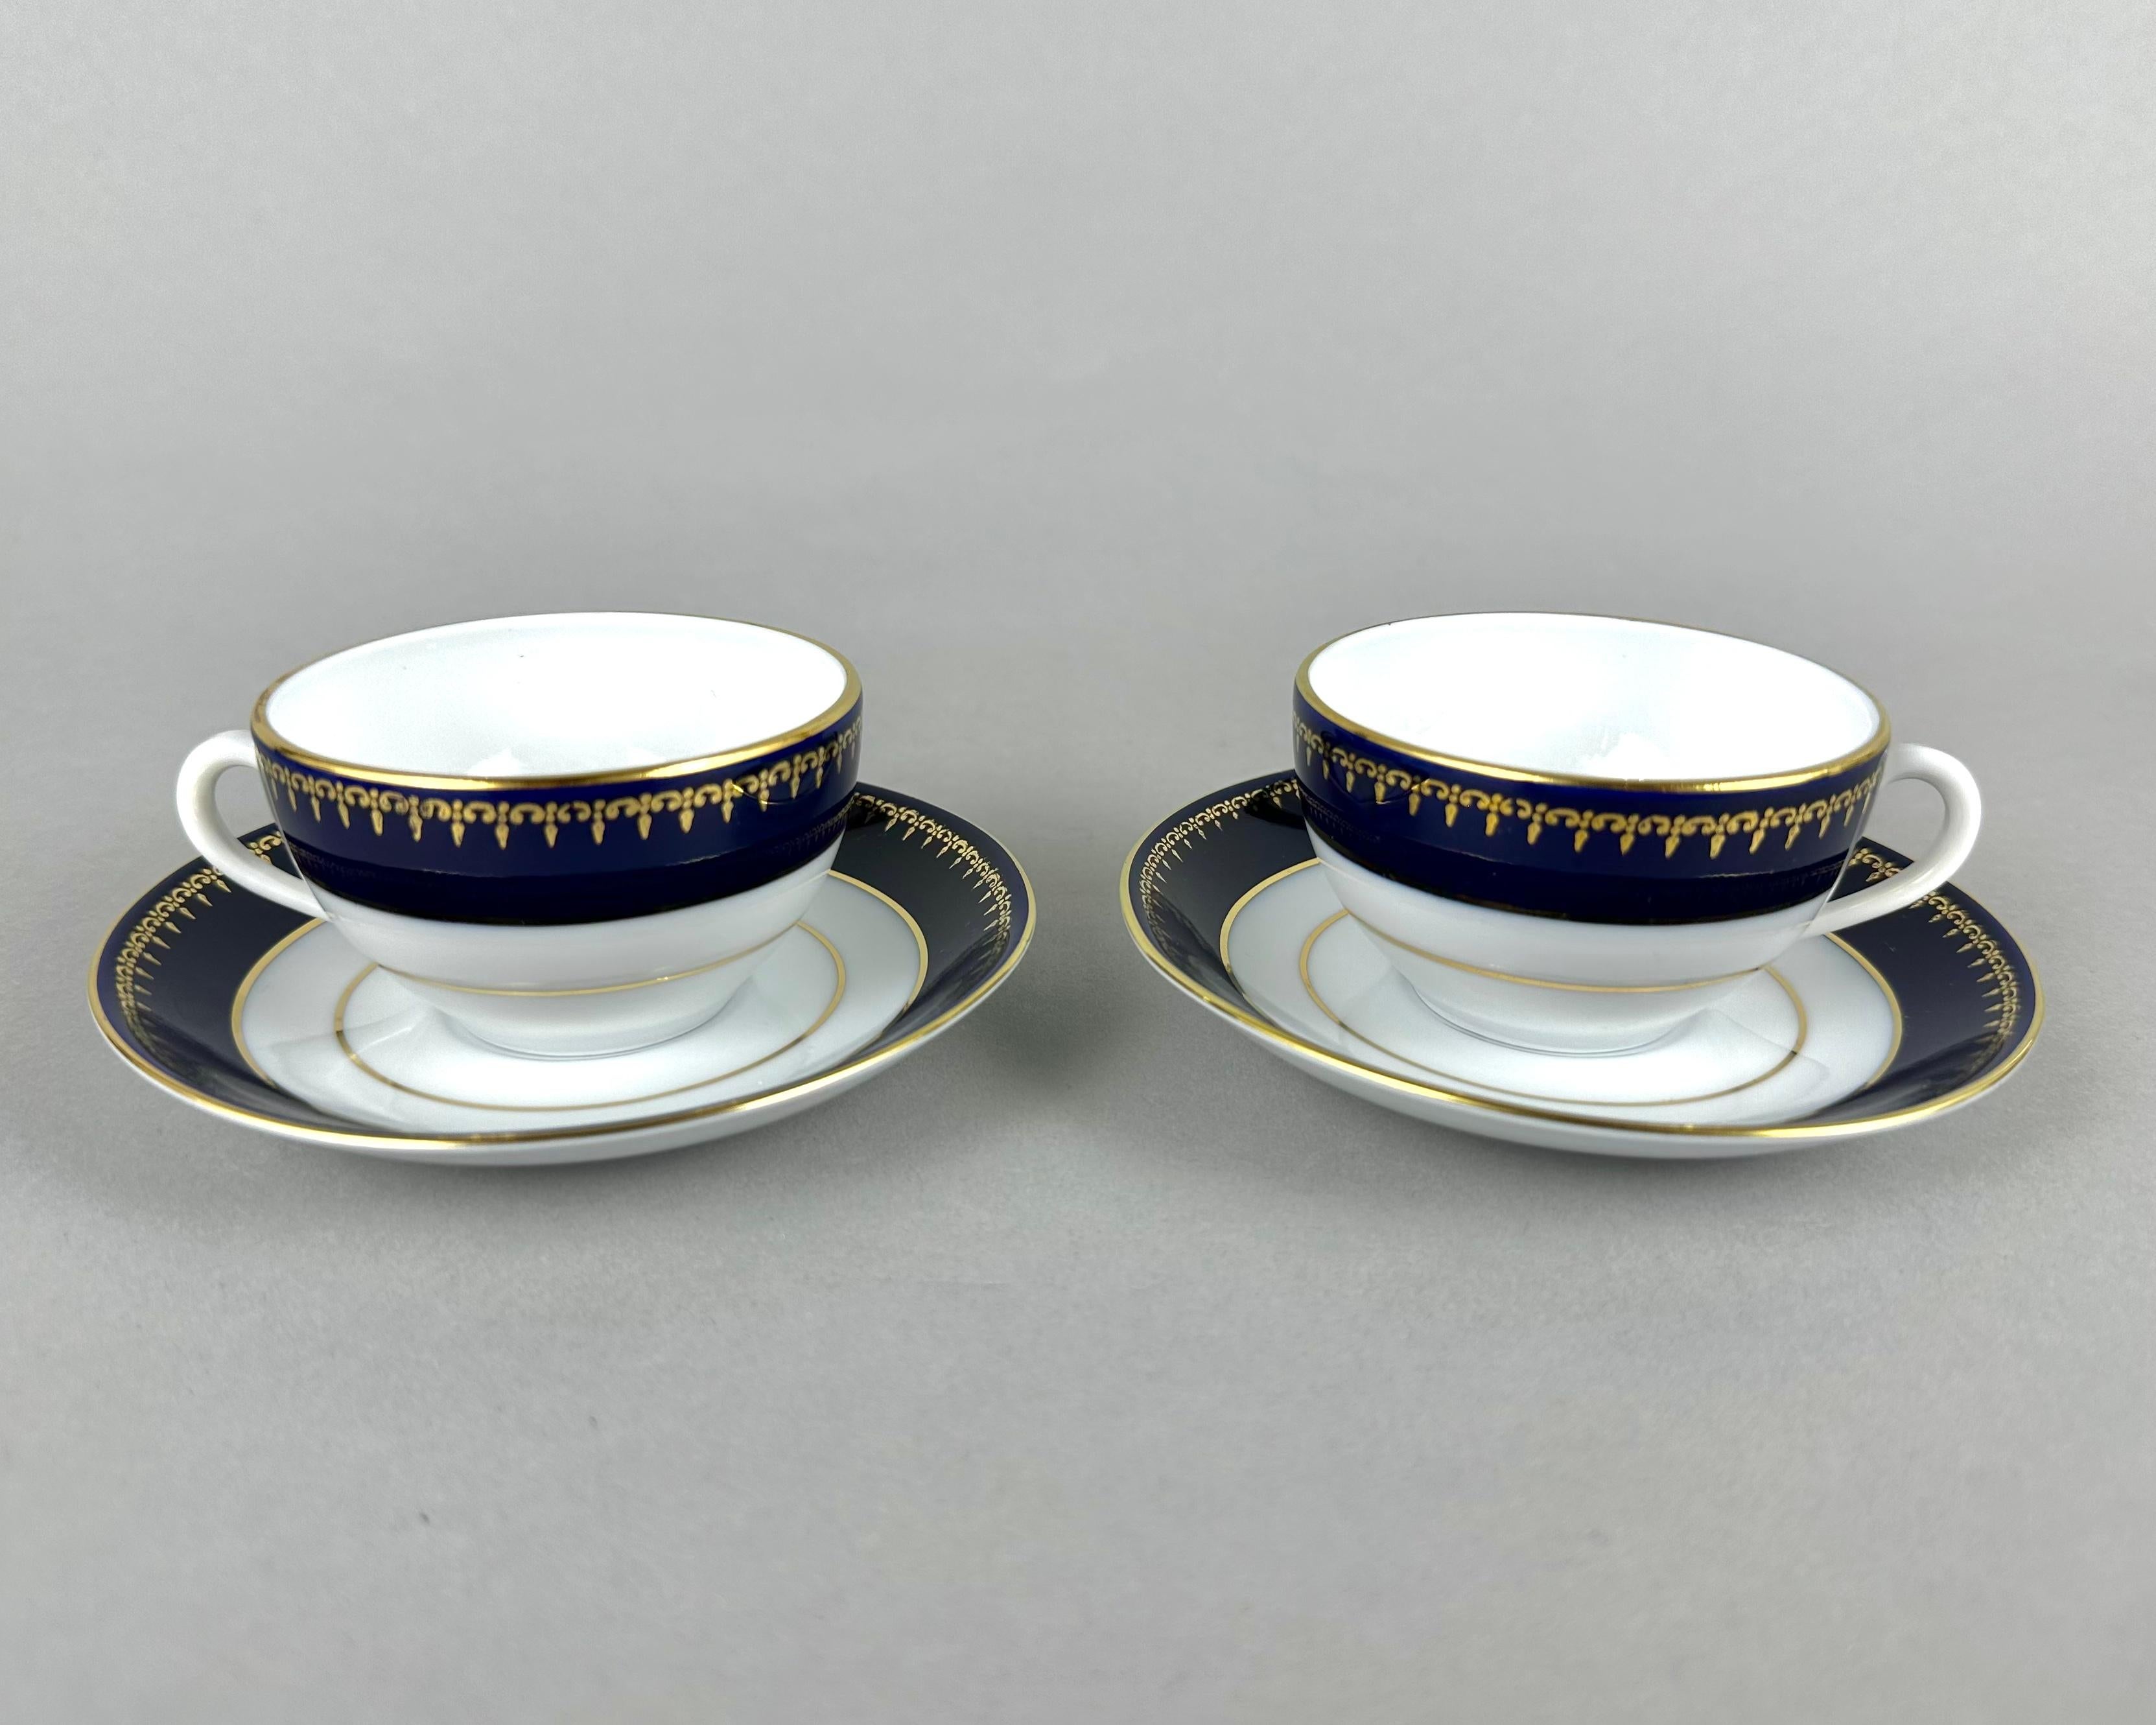 Vintage porcelain coffee or tea service set by Zsolney Manufacturer, Hungary, 1960s.

It consists of 14 pieces in an off-white colored porcelain with cobalt blue and gold rims.

Zsolnay creates handpainted porcelain since 1853, in Pécs, Hungary.

On